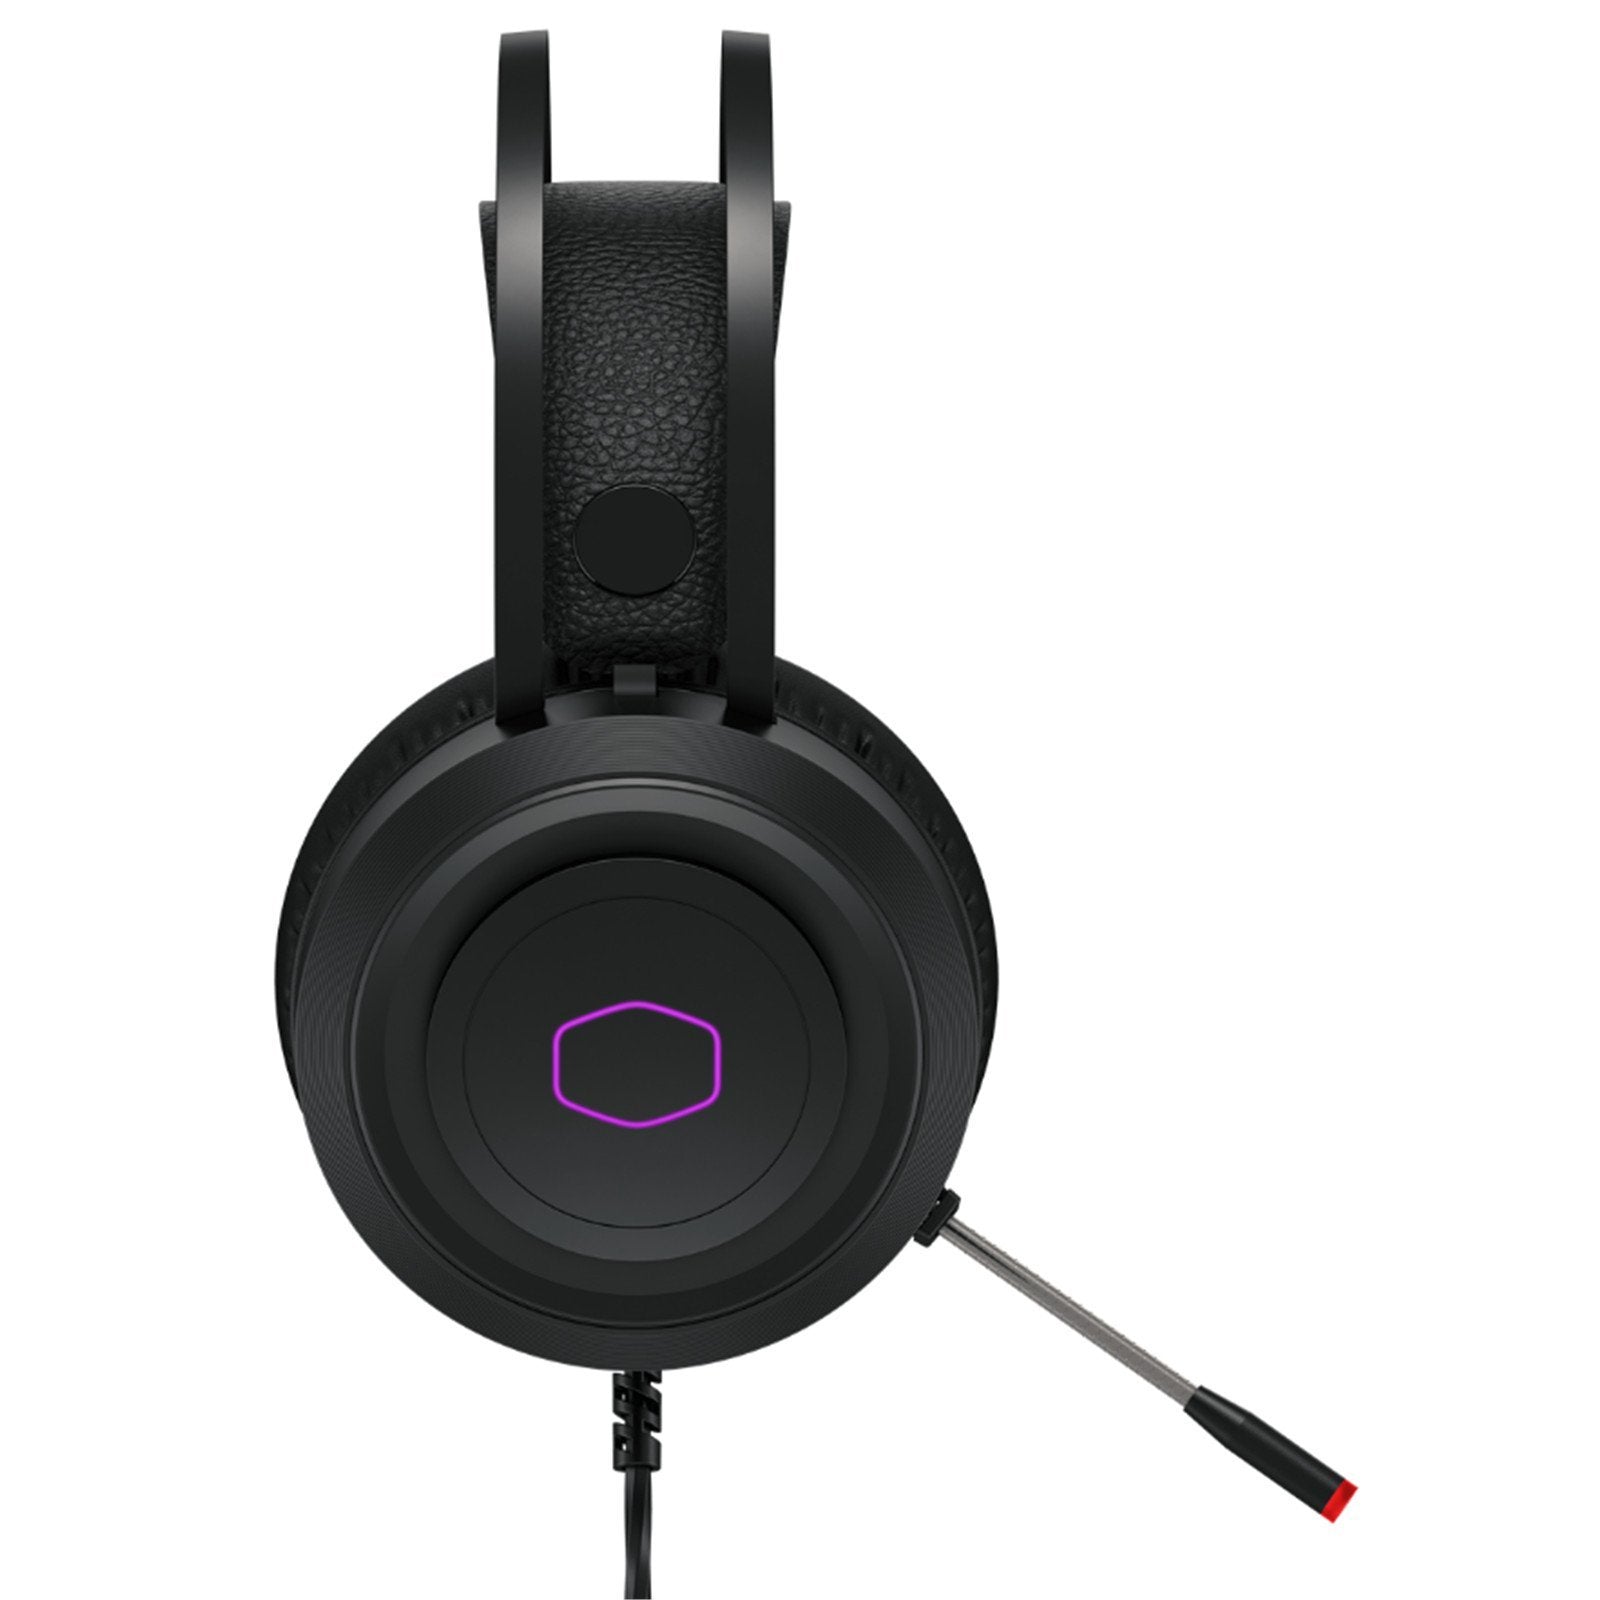 Cooler Master CH321 RGB Gaming Headset - Black - Store 974 | ستور ٩٧٤